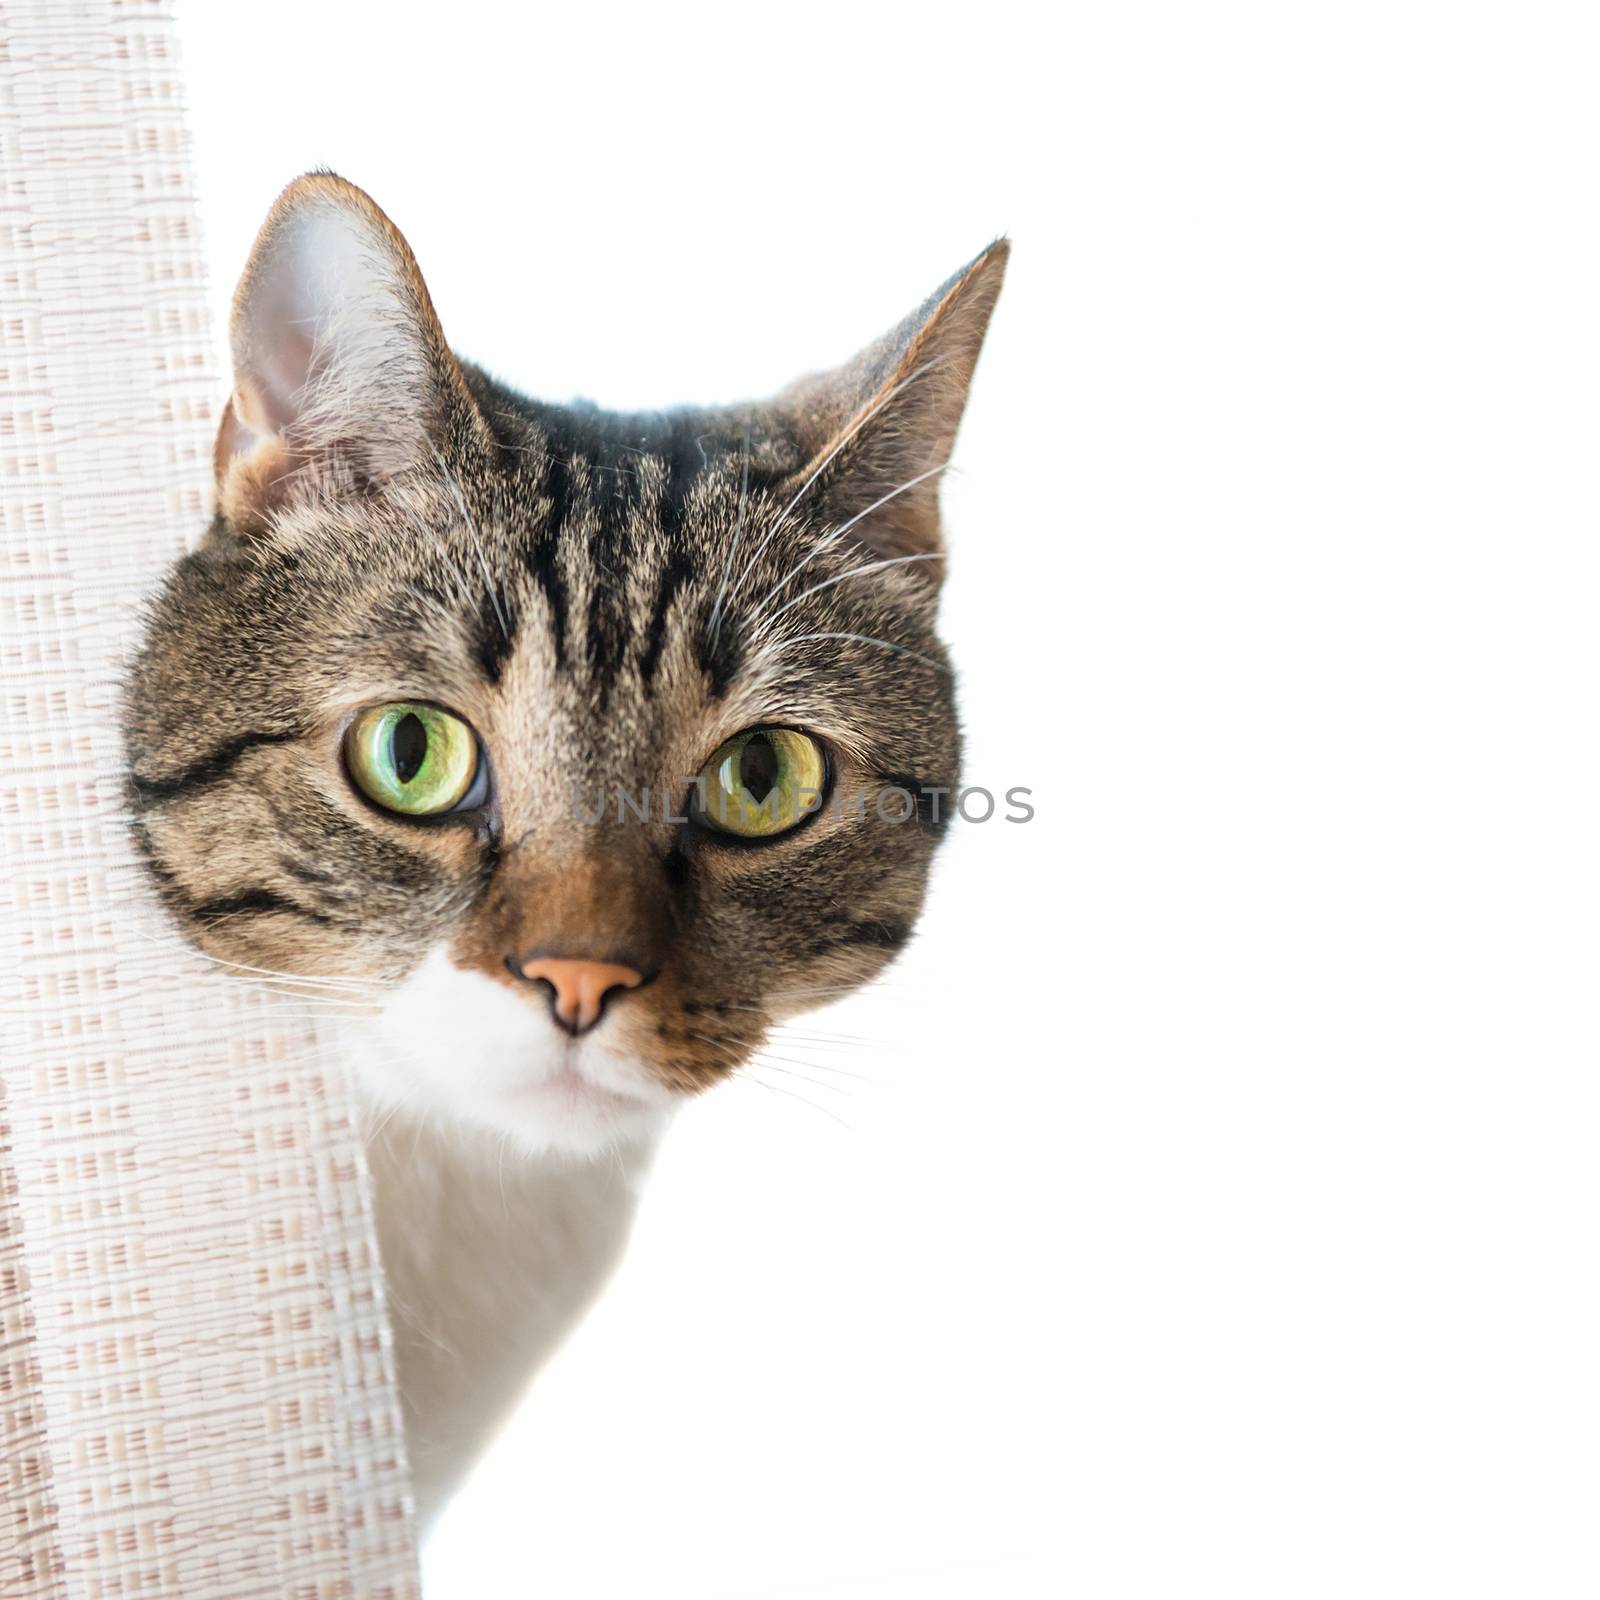 Little gray striped and curiously looking cat isolated on white background